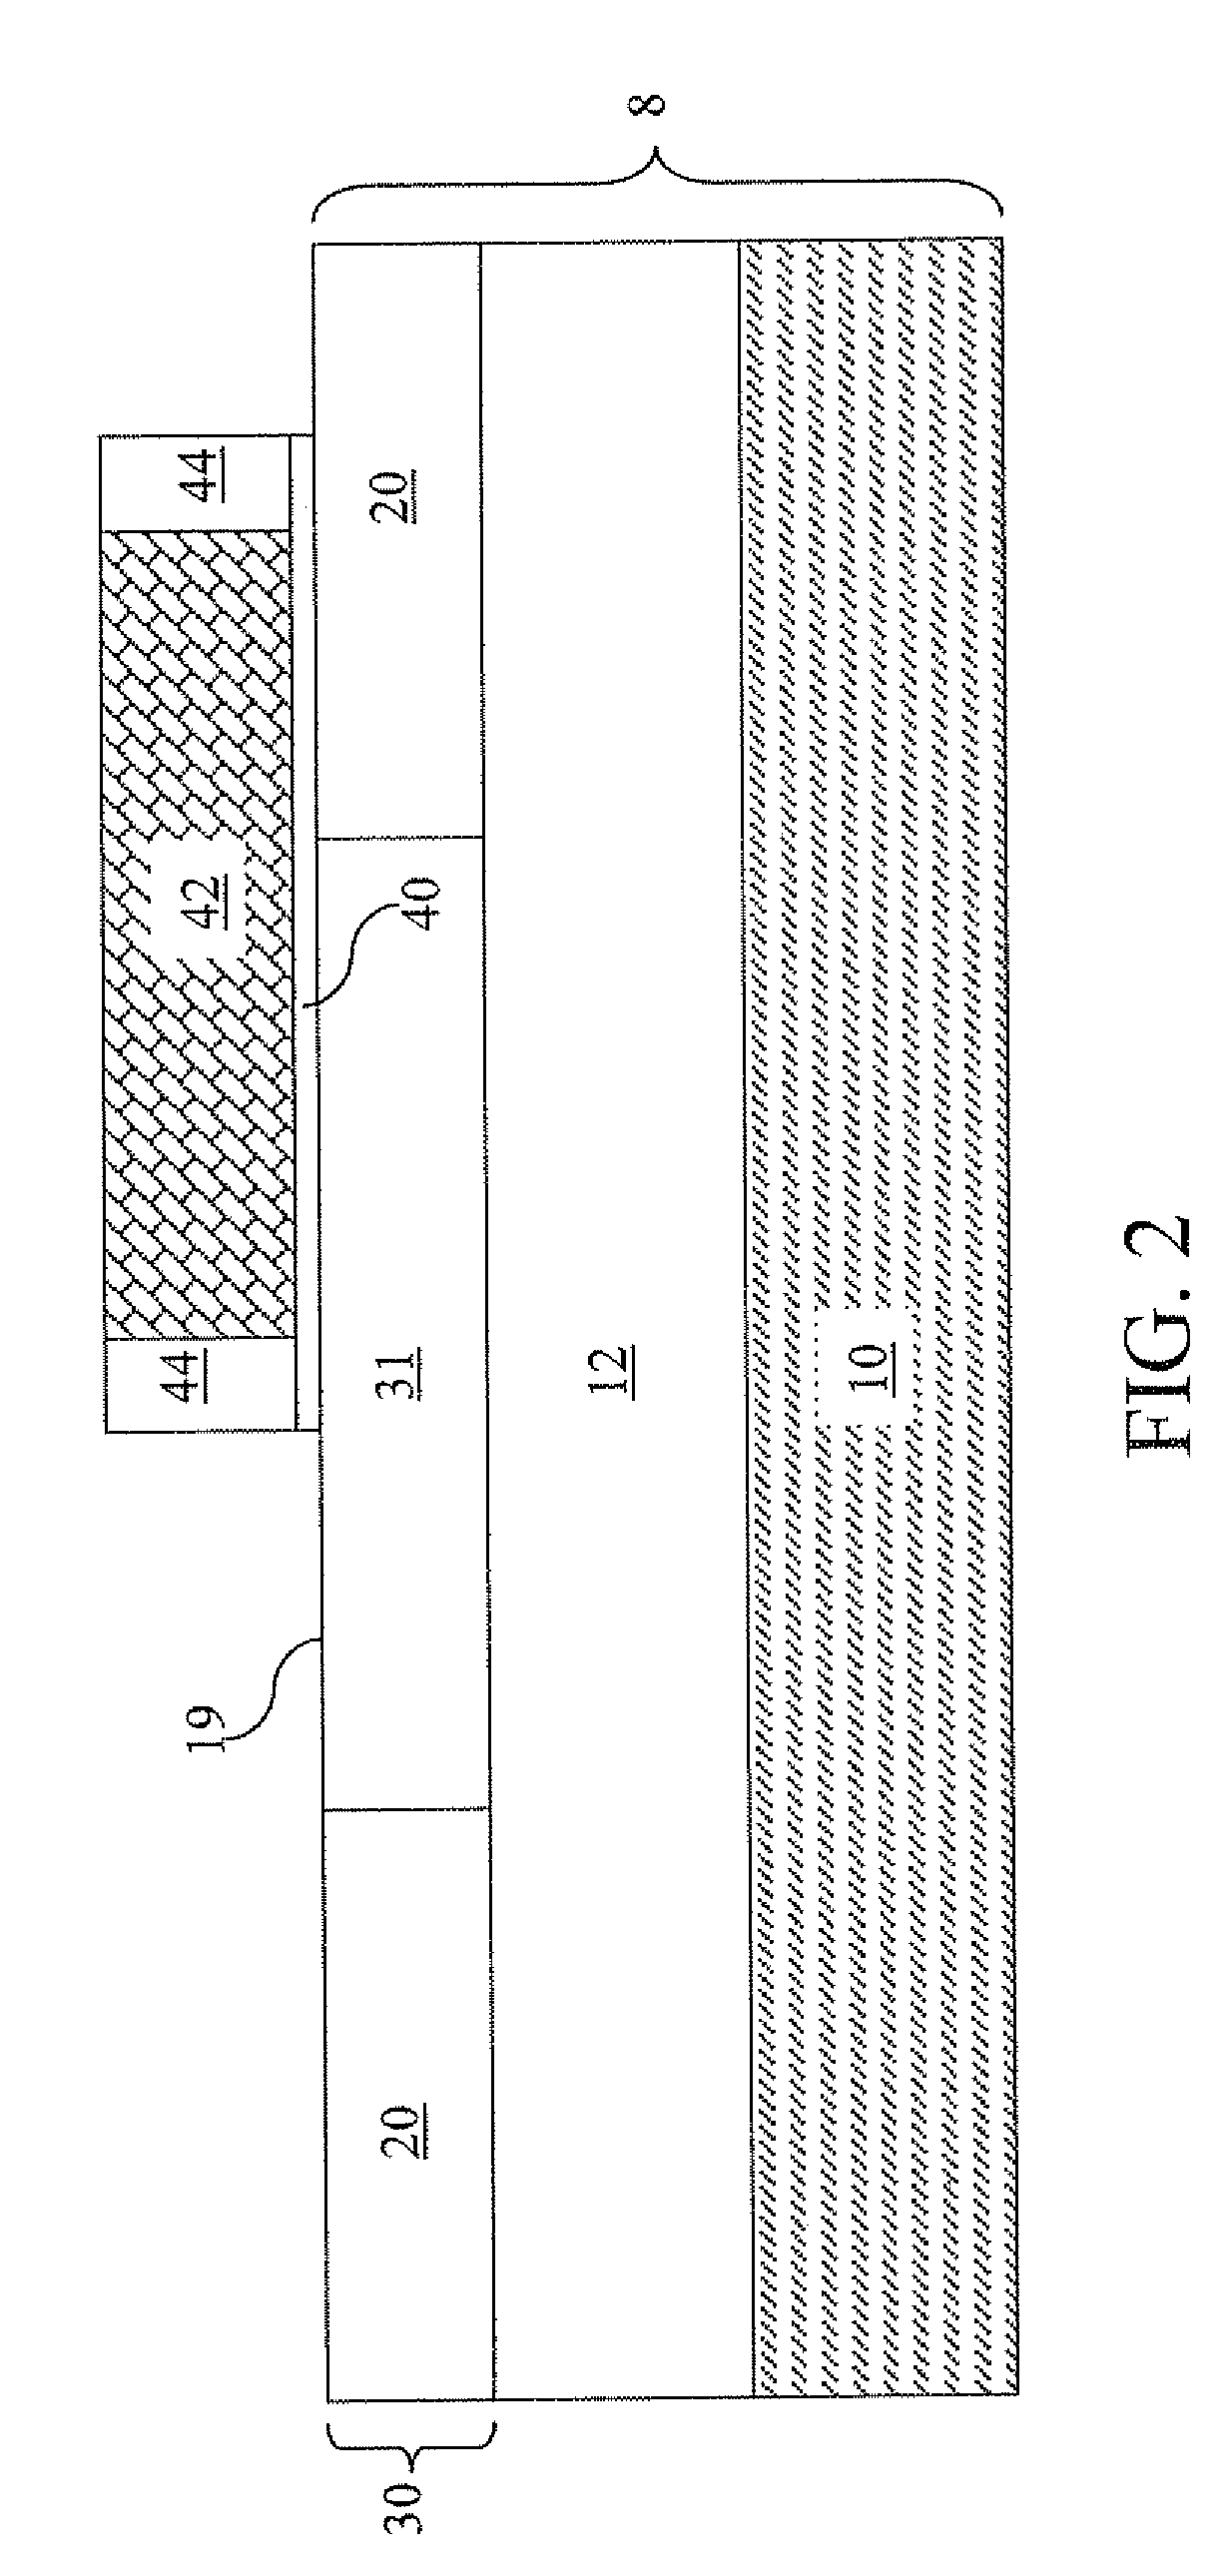 Tunneling effect transistor with self-aligned gate